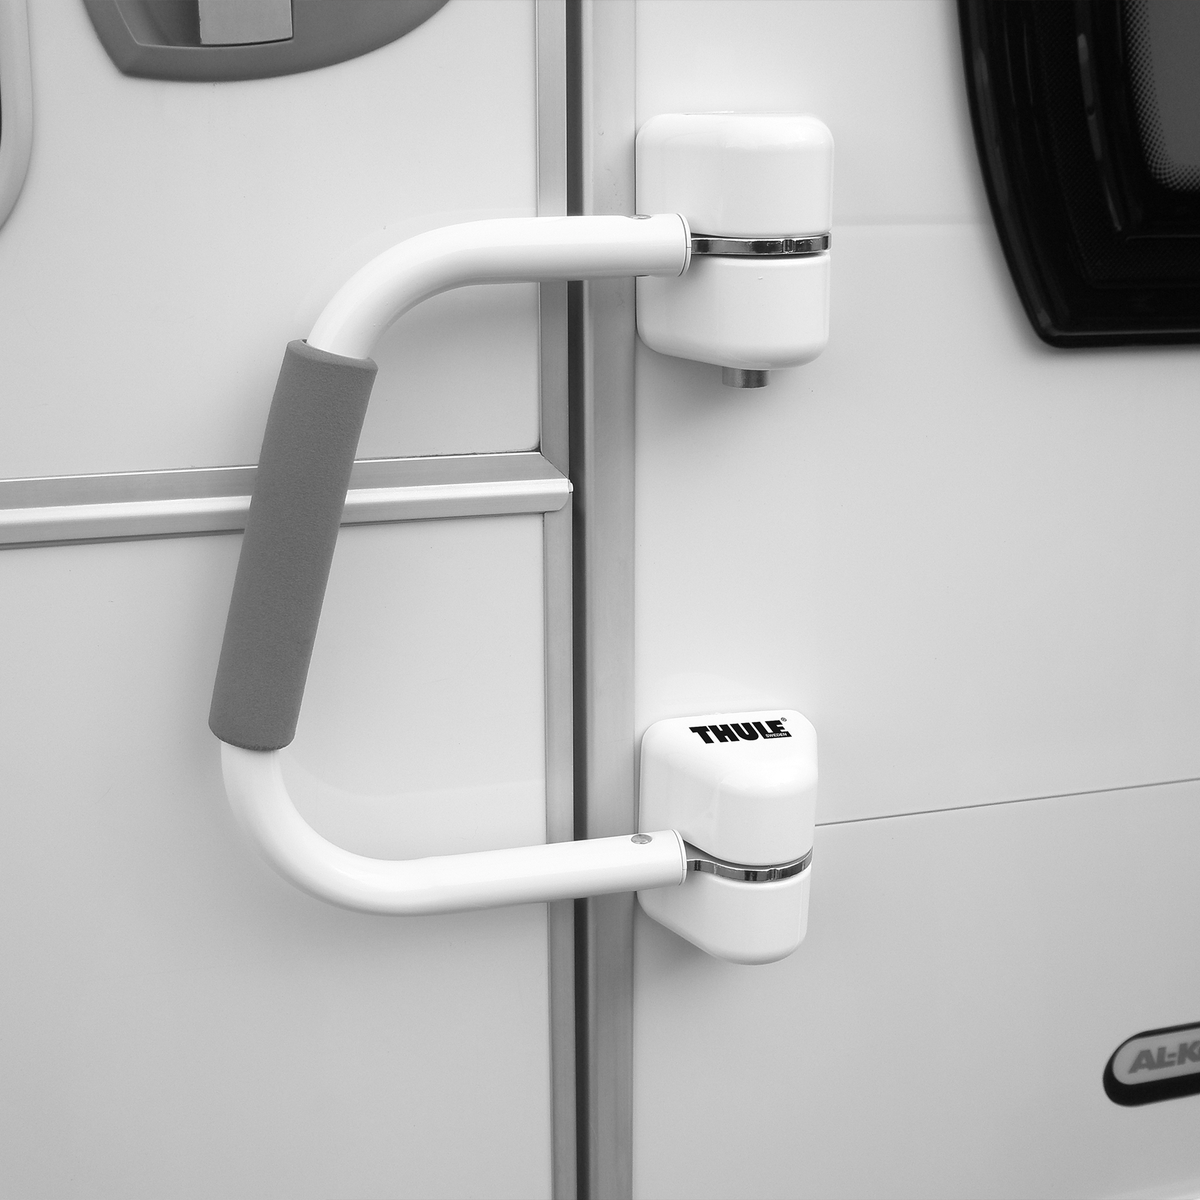 A picture of the Thule Security Handrail attached to the door of a motorhome.